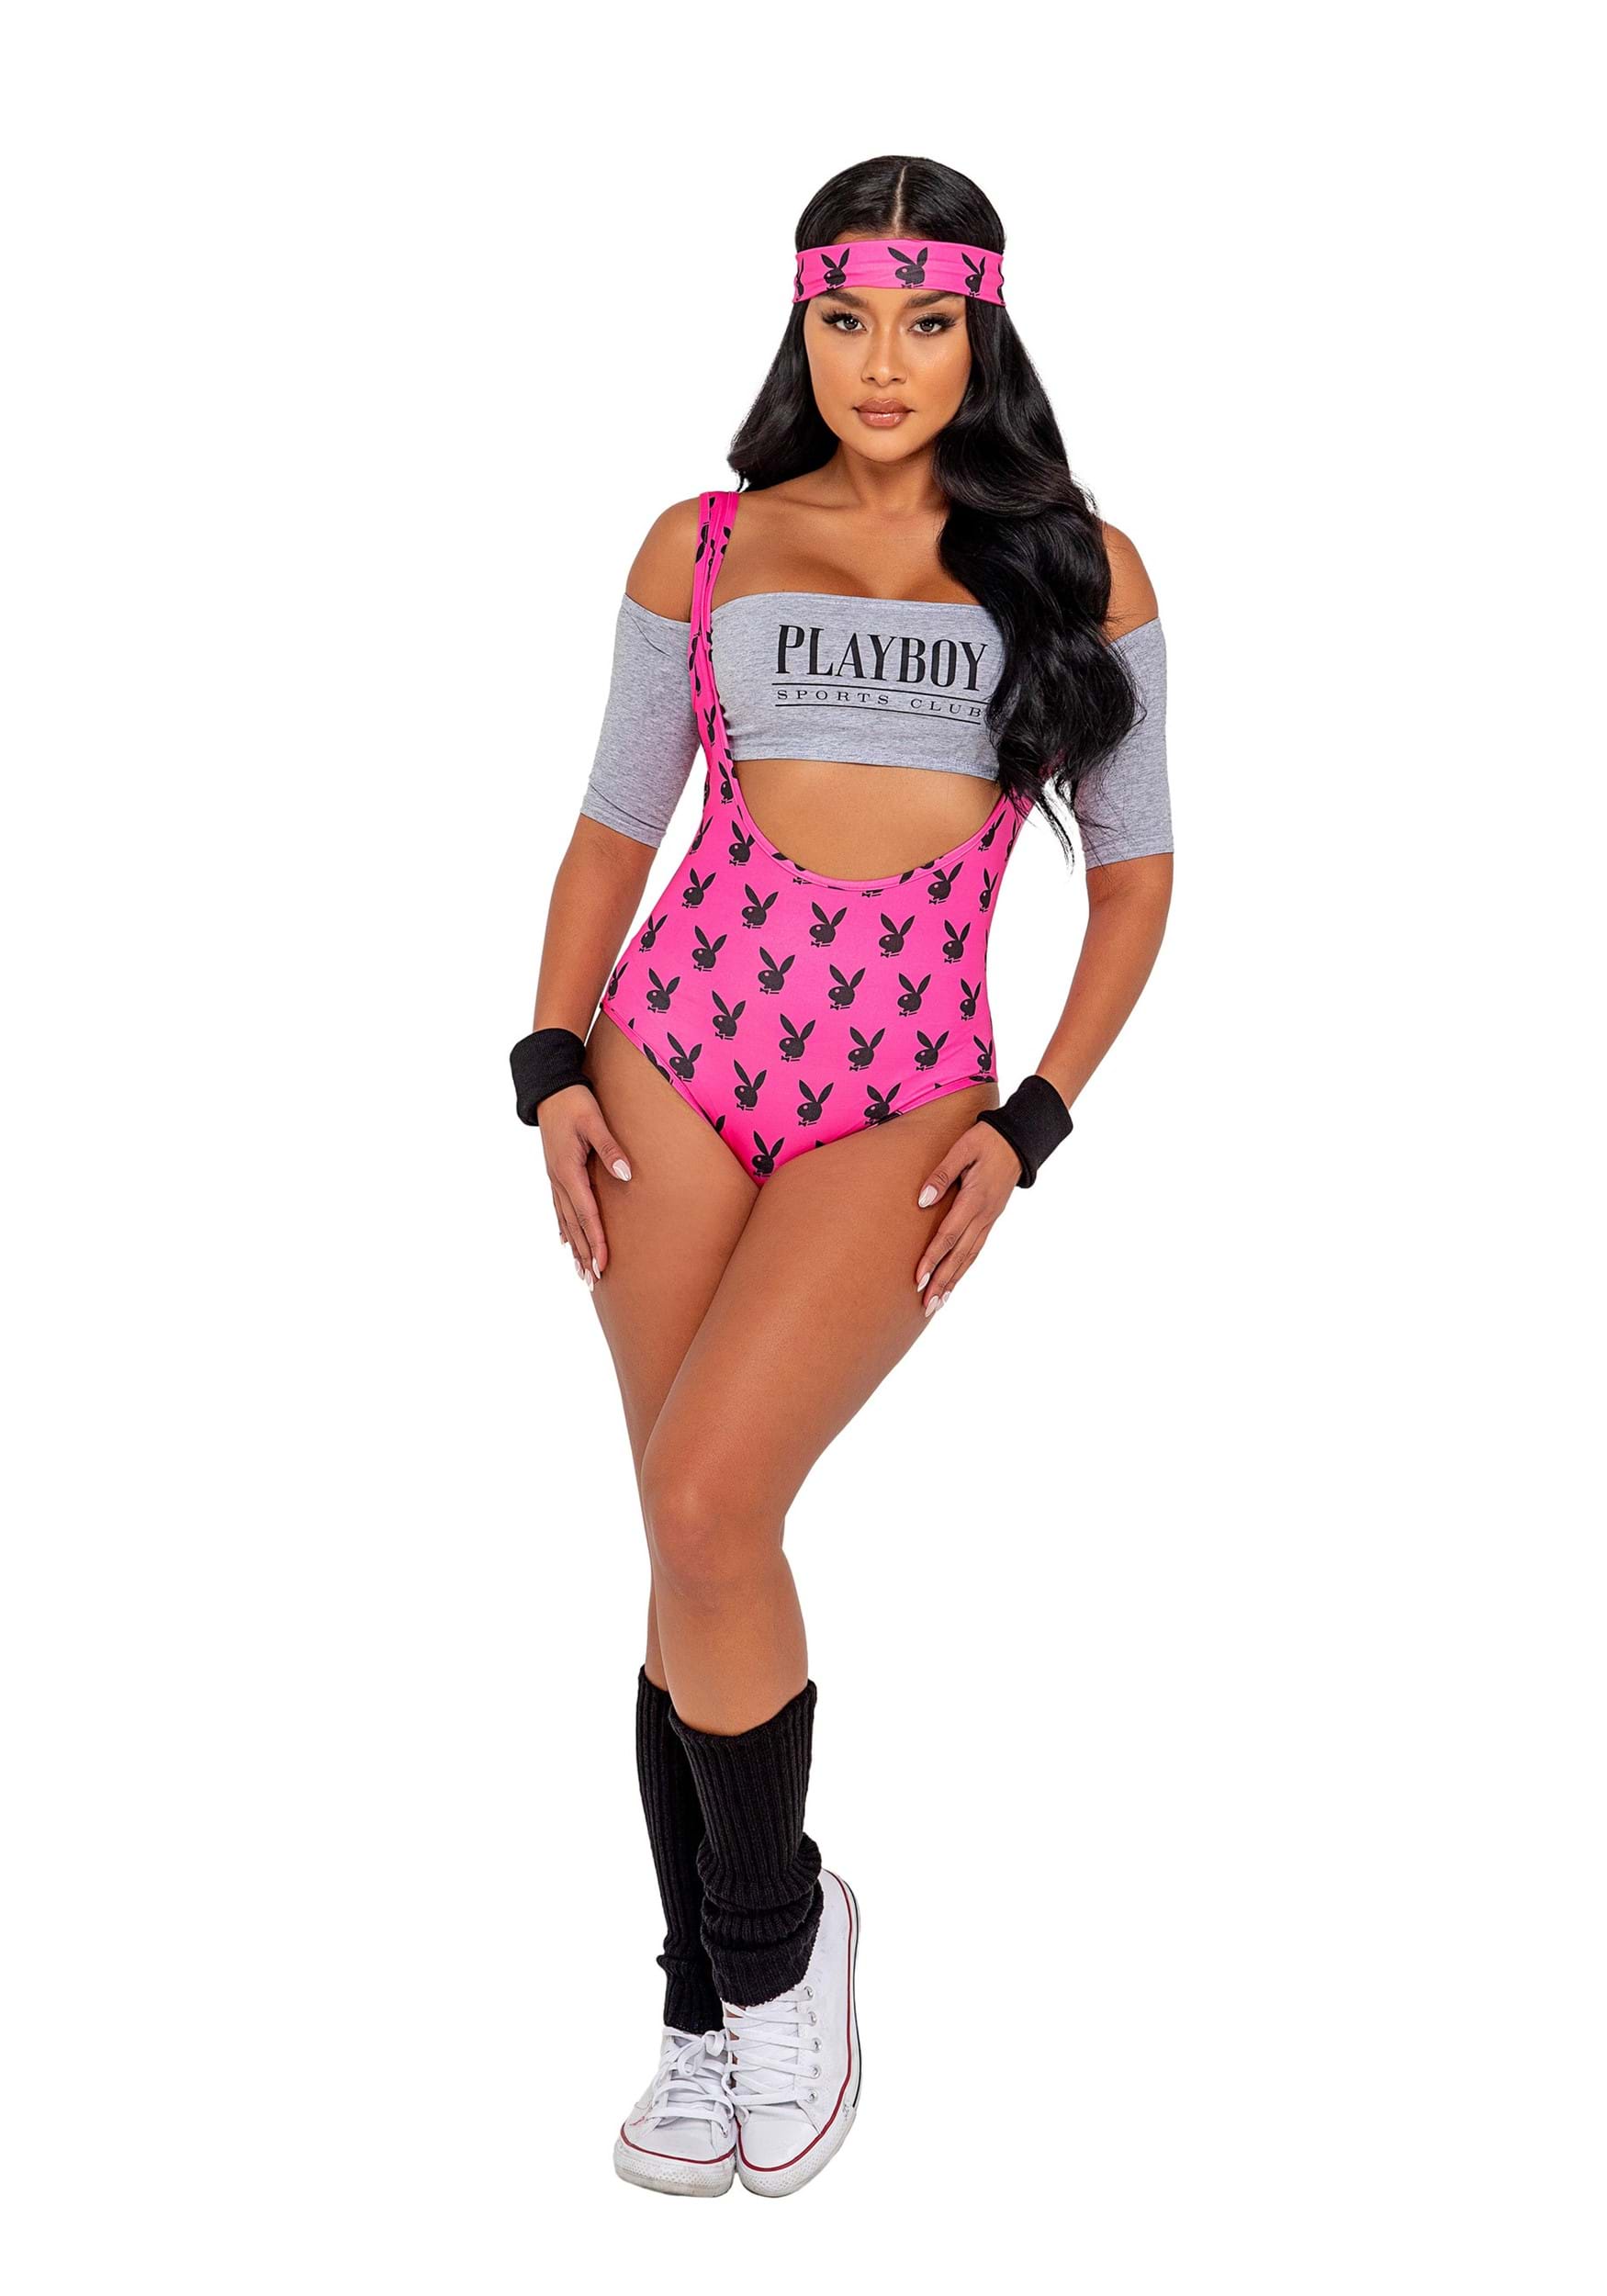 Image of Playboy Retro Physical Costume for Women ID ROPB144-L